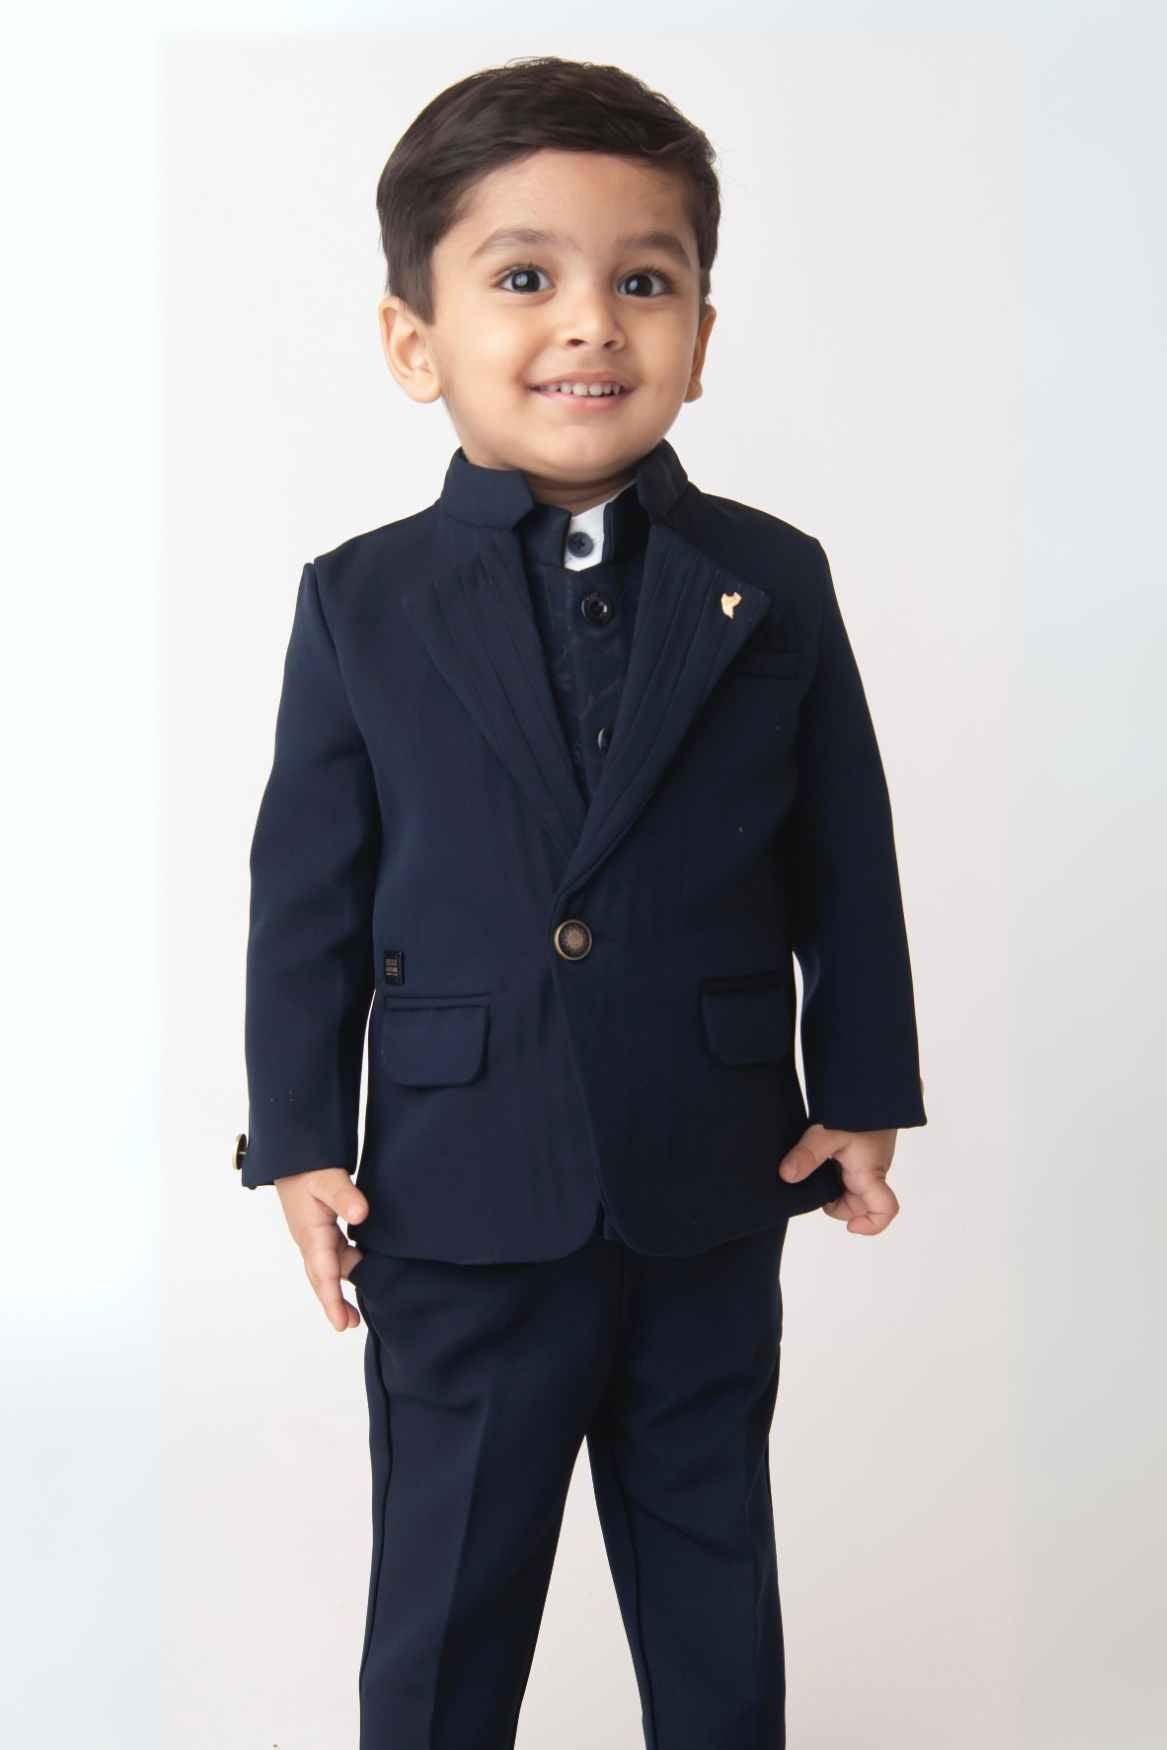 Classic Blue Four Pc Suite With White Shirt Embossed Waist Coat Set For Boys - Lagorii Kids